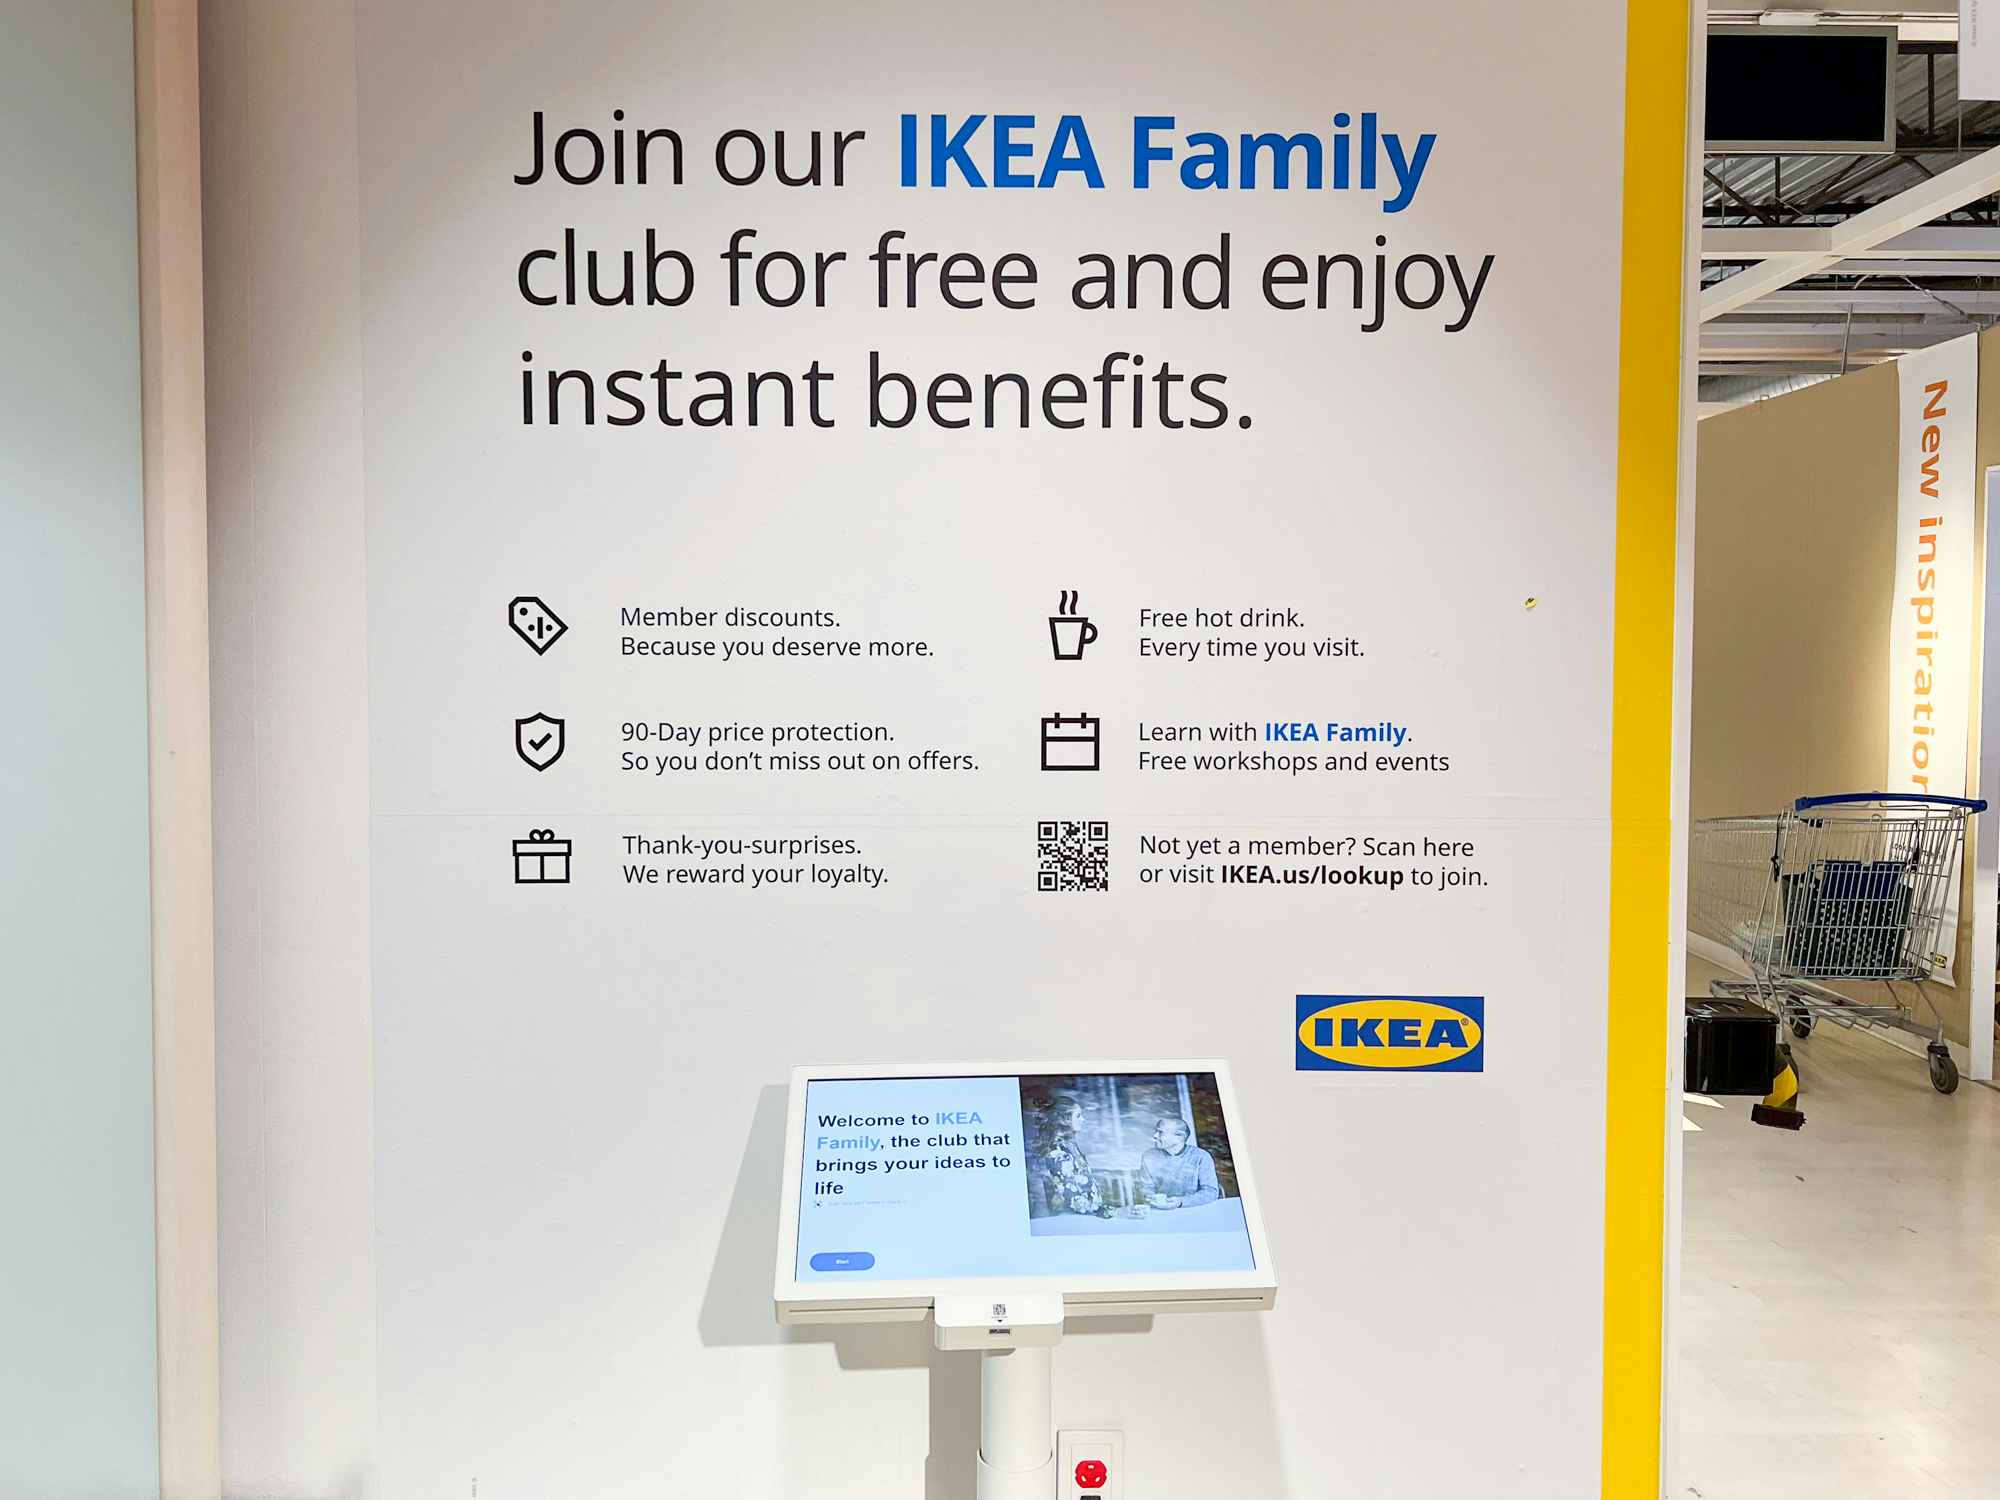 https://prod-cdn-thekrazycouponlady.imgix.net/wp-content/uploads/2016/03/ikea-store-family-member-sign-up-kcl-14-1694012707-1694012707.jpg?auto=format&fit=fill&q=25